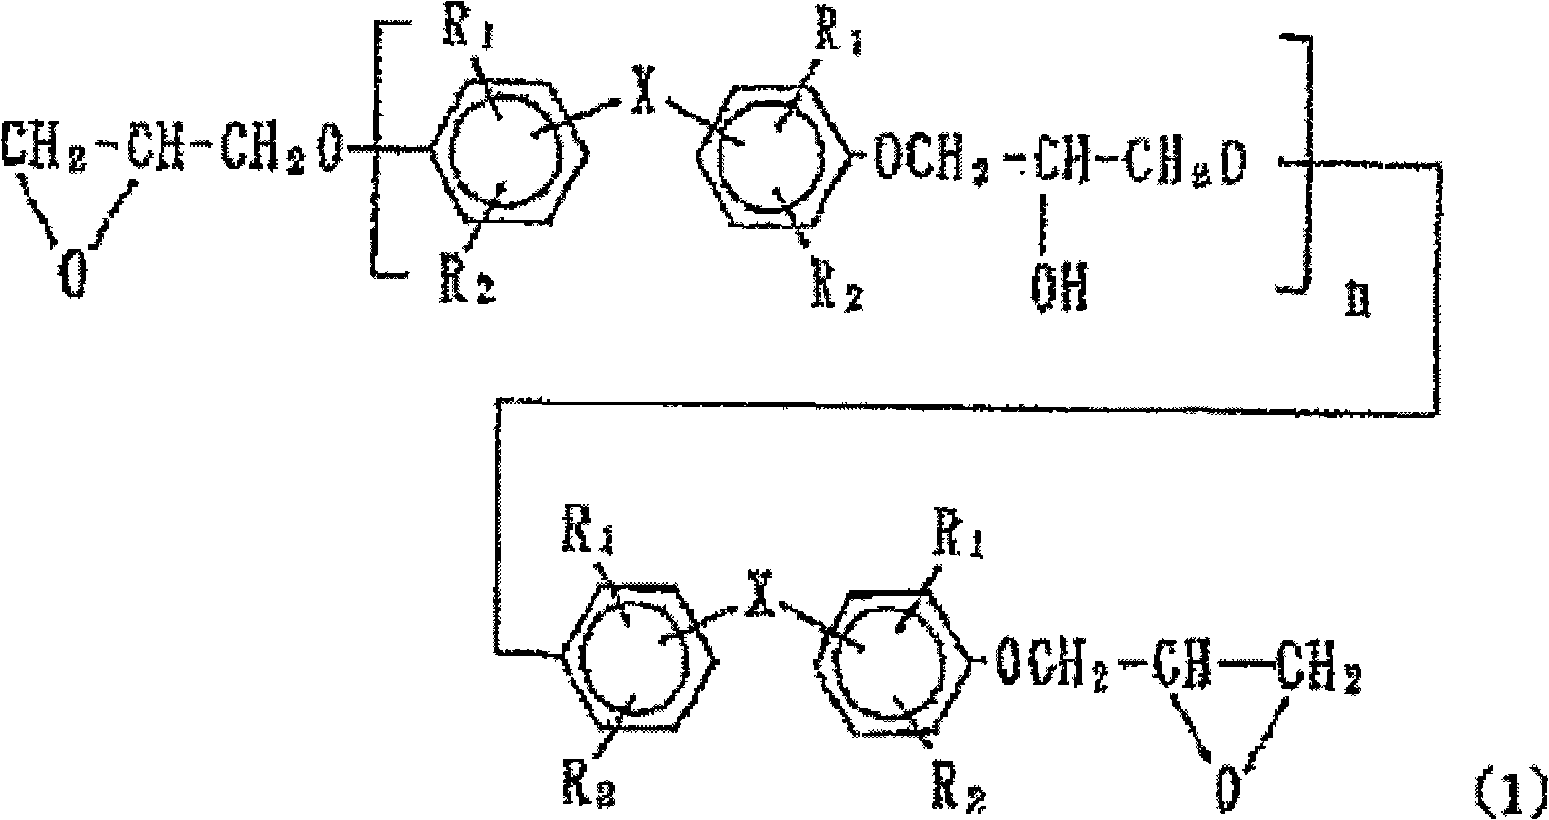 Photosensitive compound, solidifying film and septum